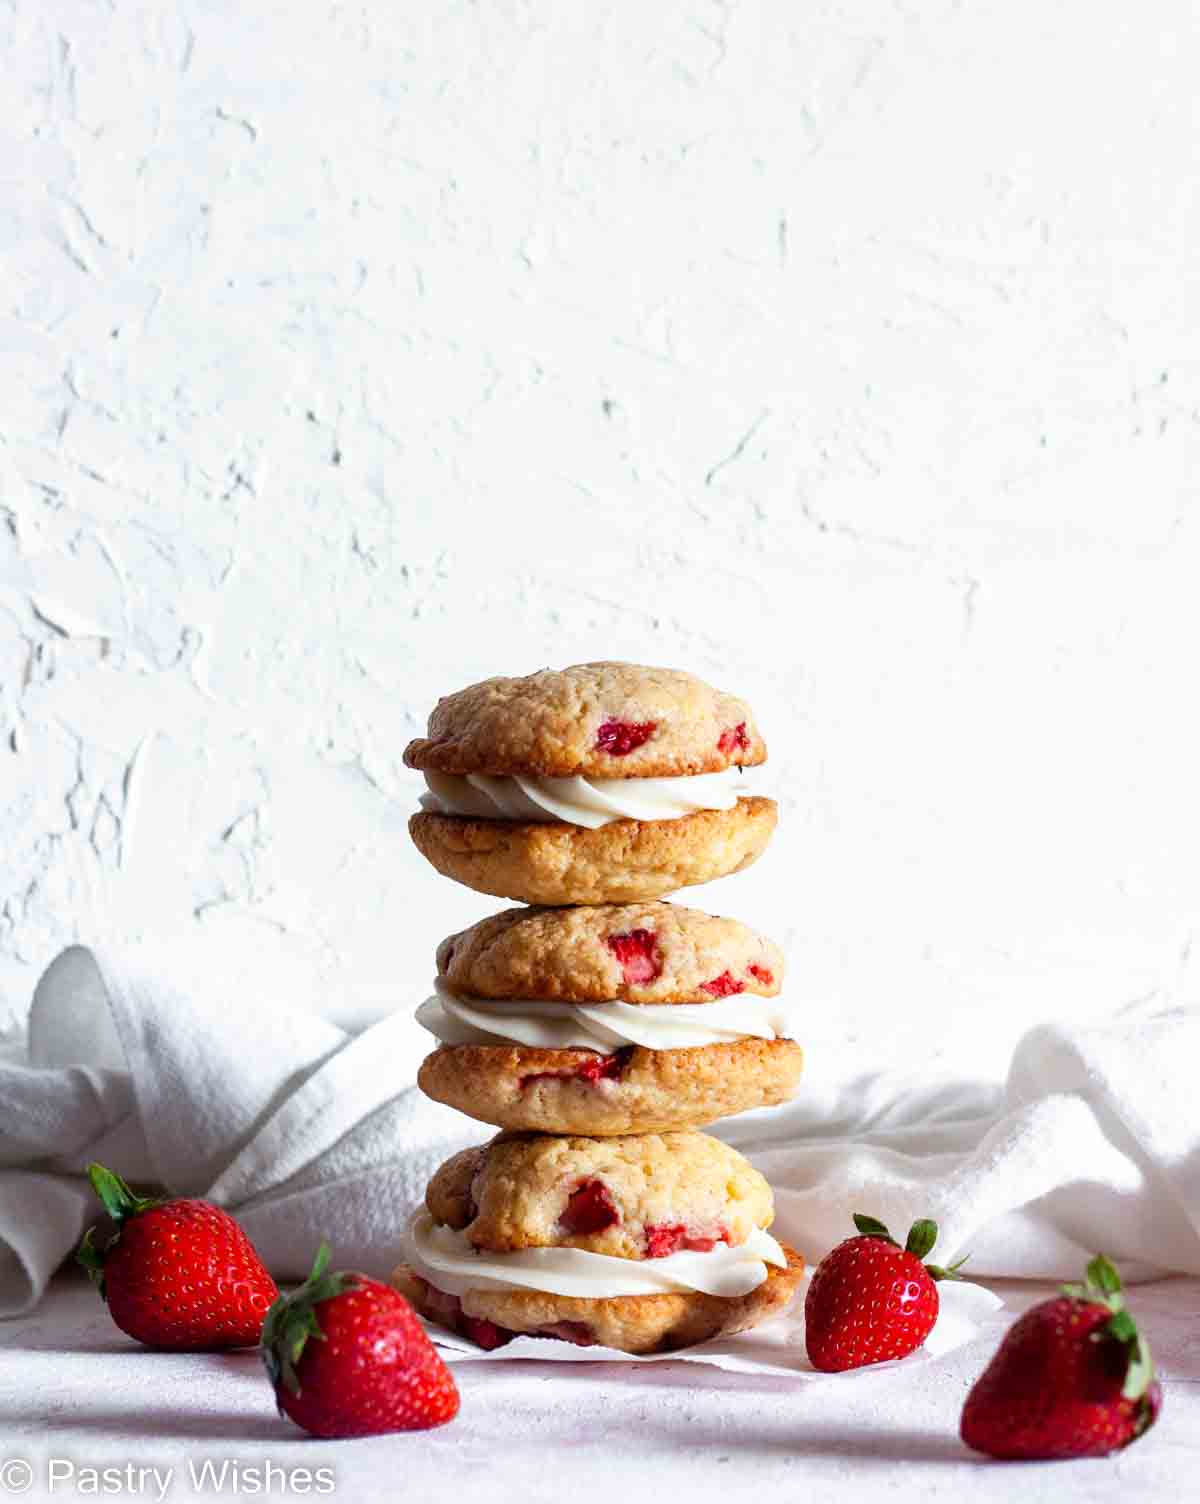 A stack of three strawberry cheesecake cookies on parchment paper next to strawberries and a white napkin.